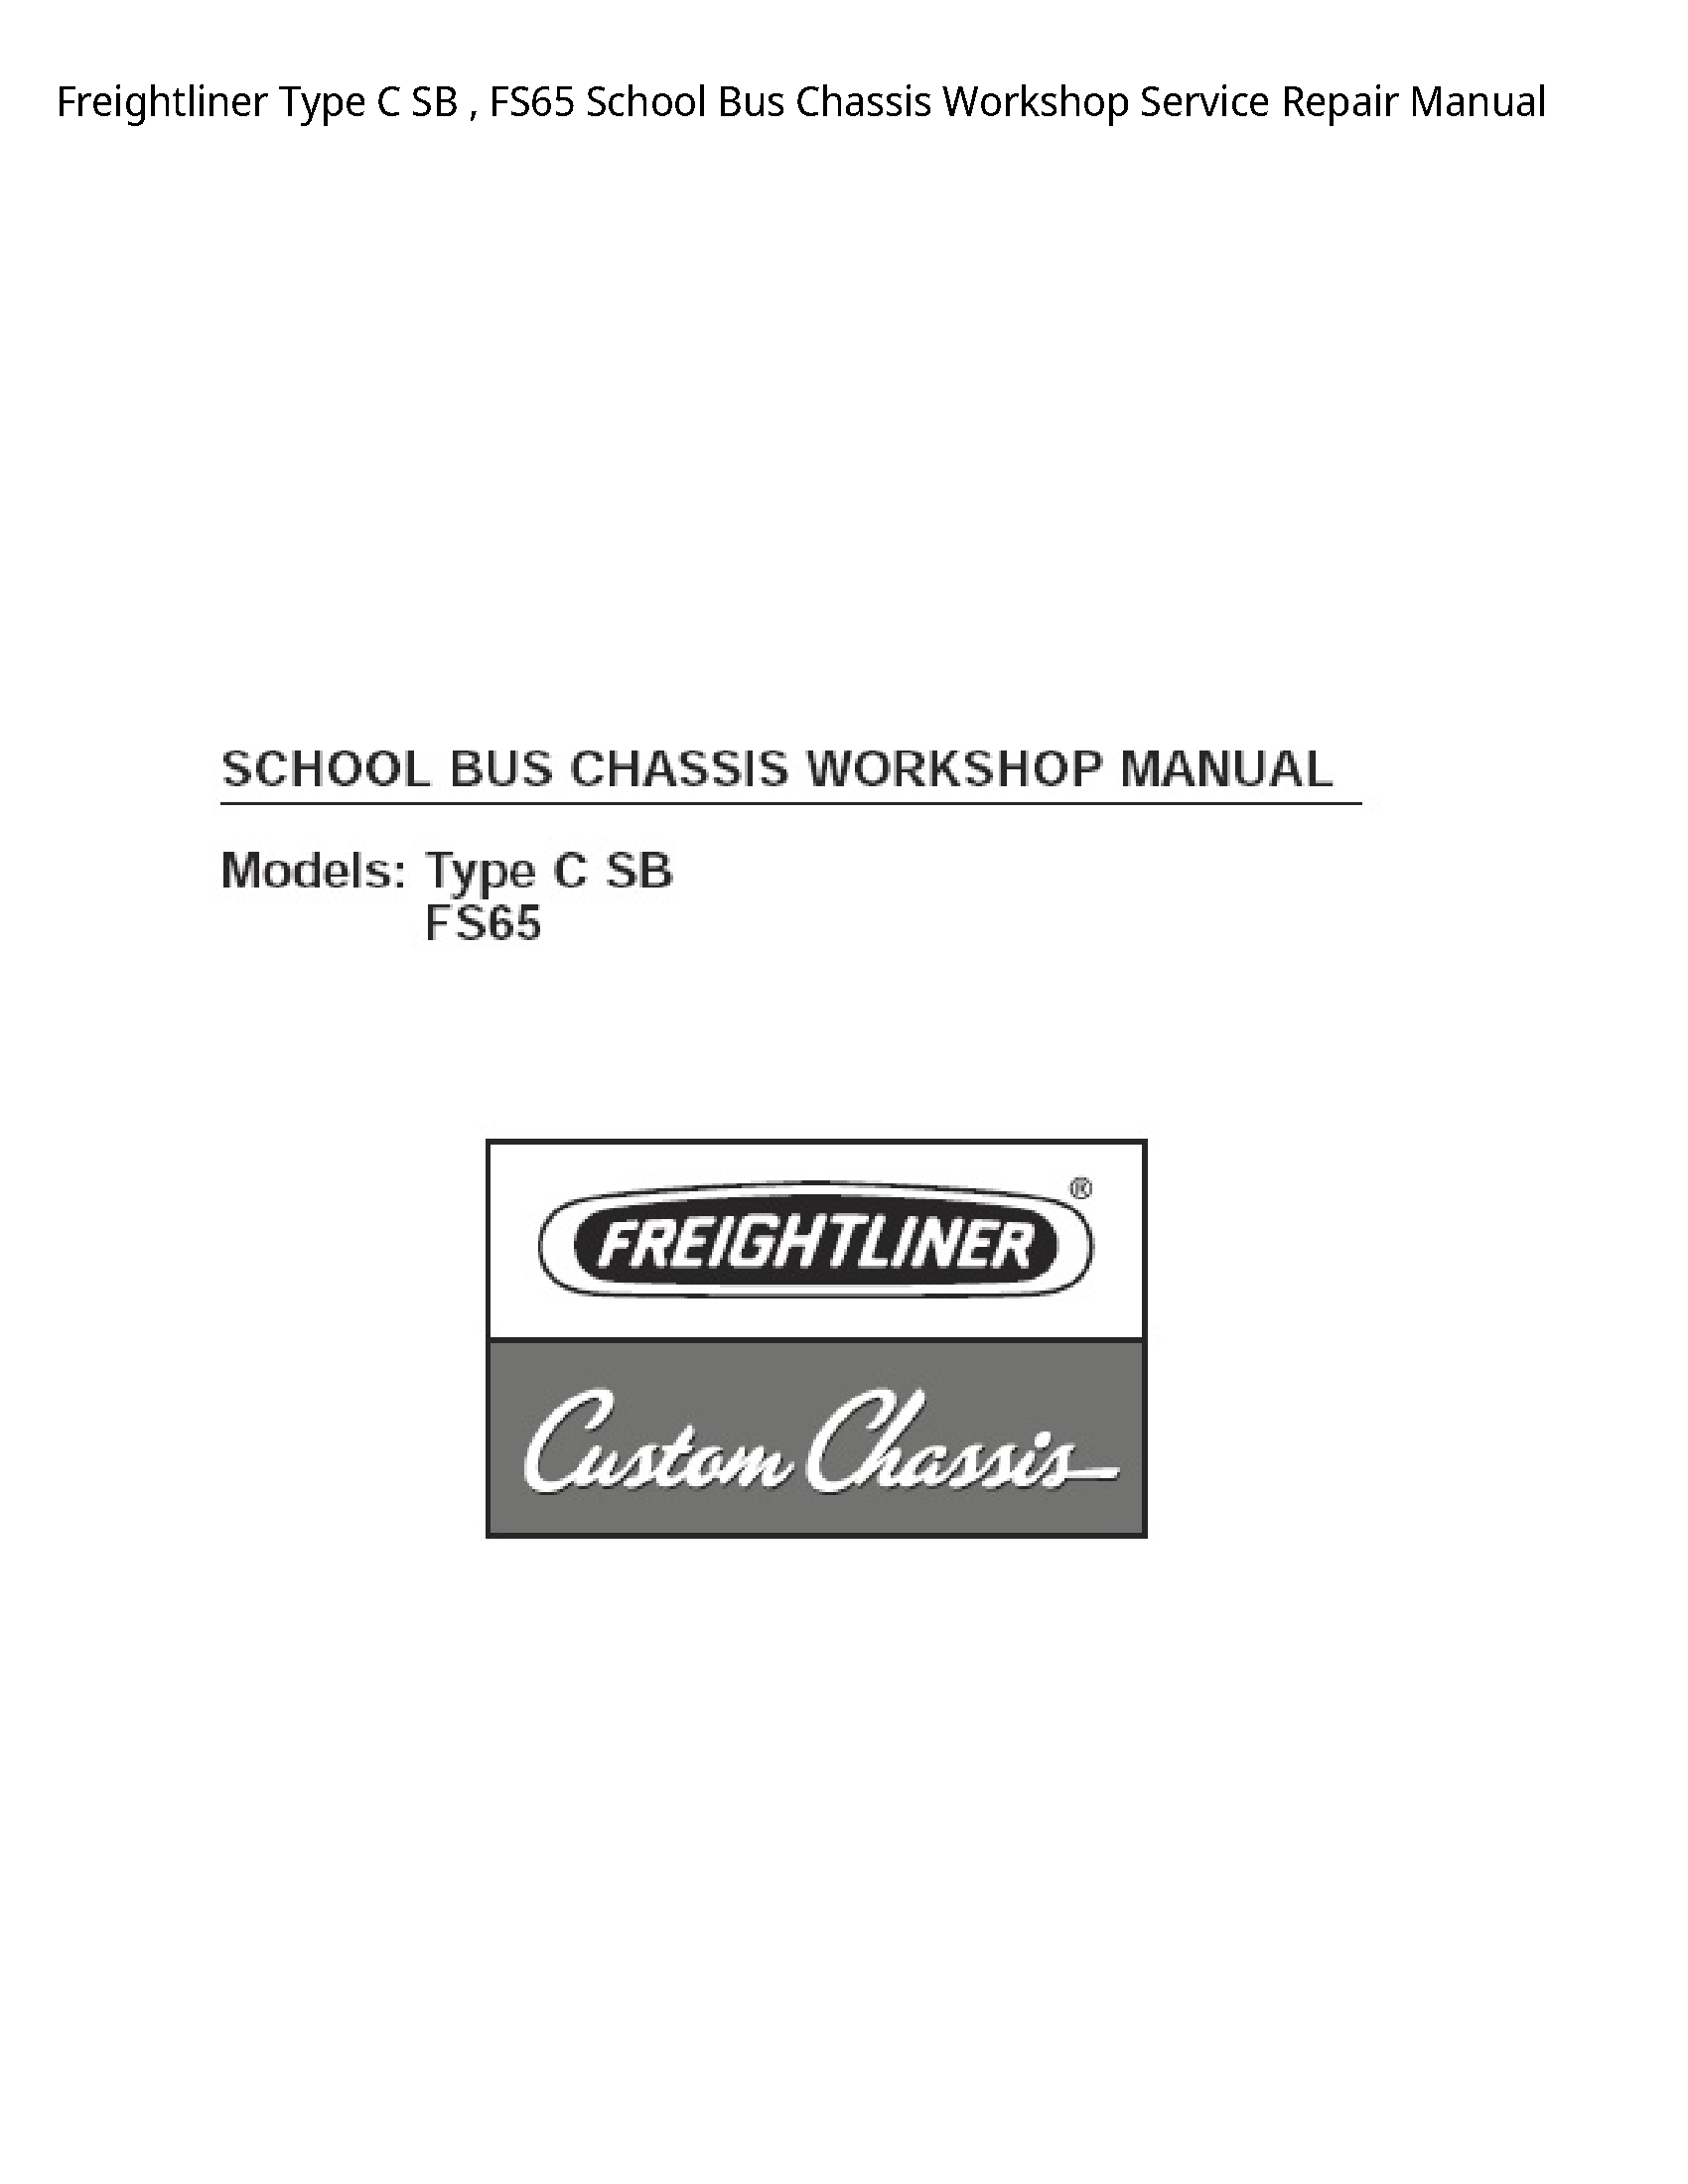 Freightliner FS65 Type SB School Bus Chassis manual